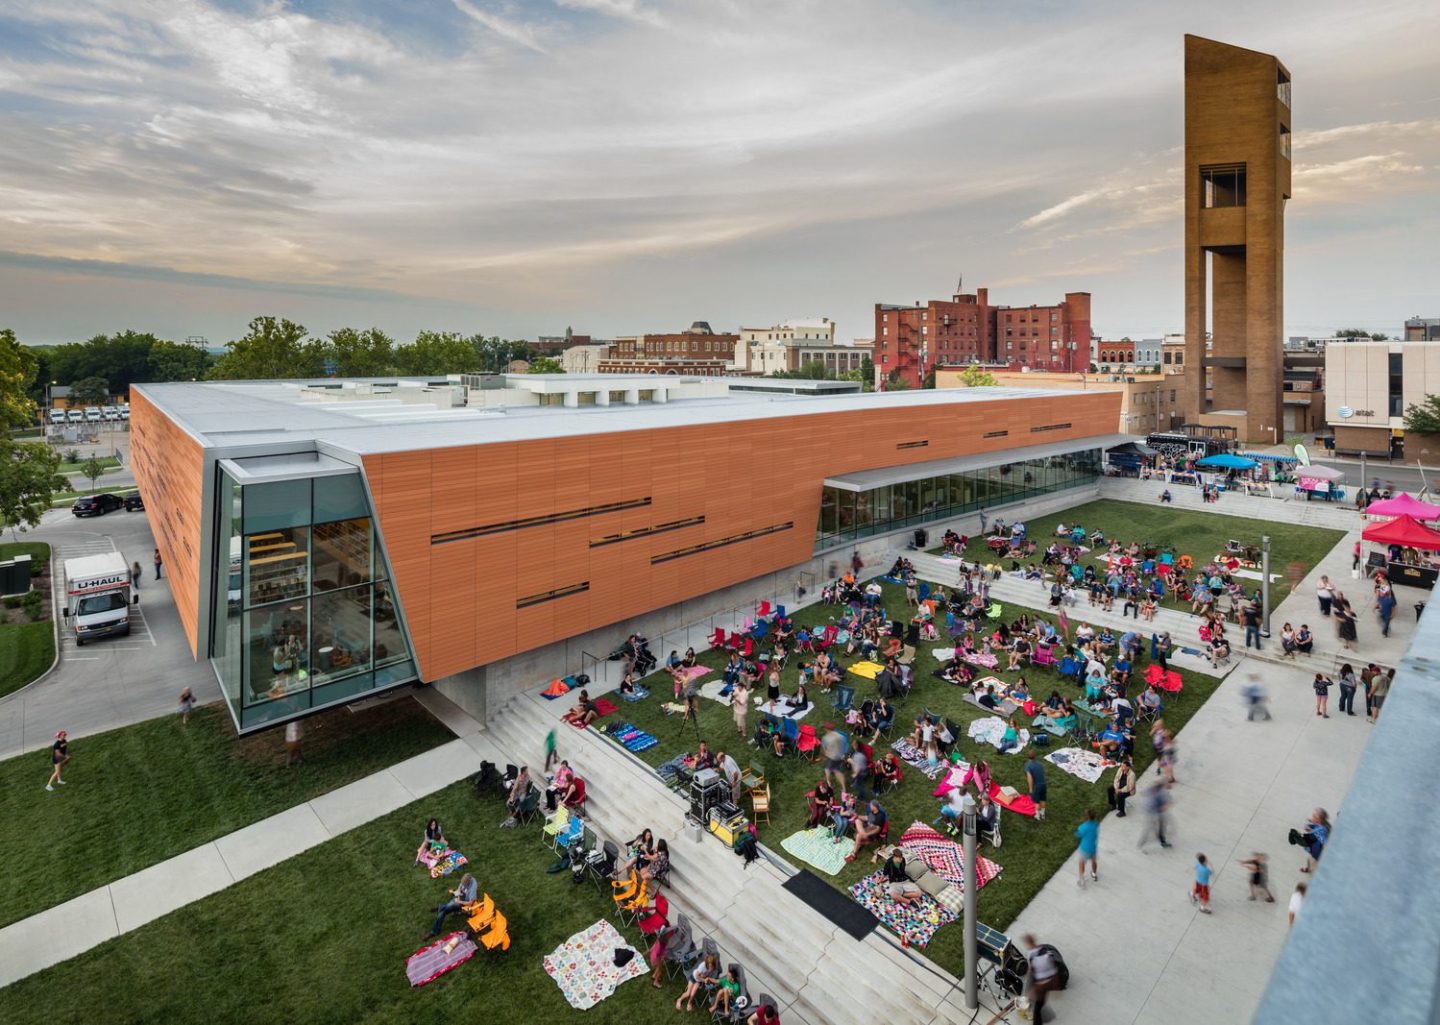 Aerial view of Lawrence Public Library with large crowd occupying public plaze